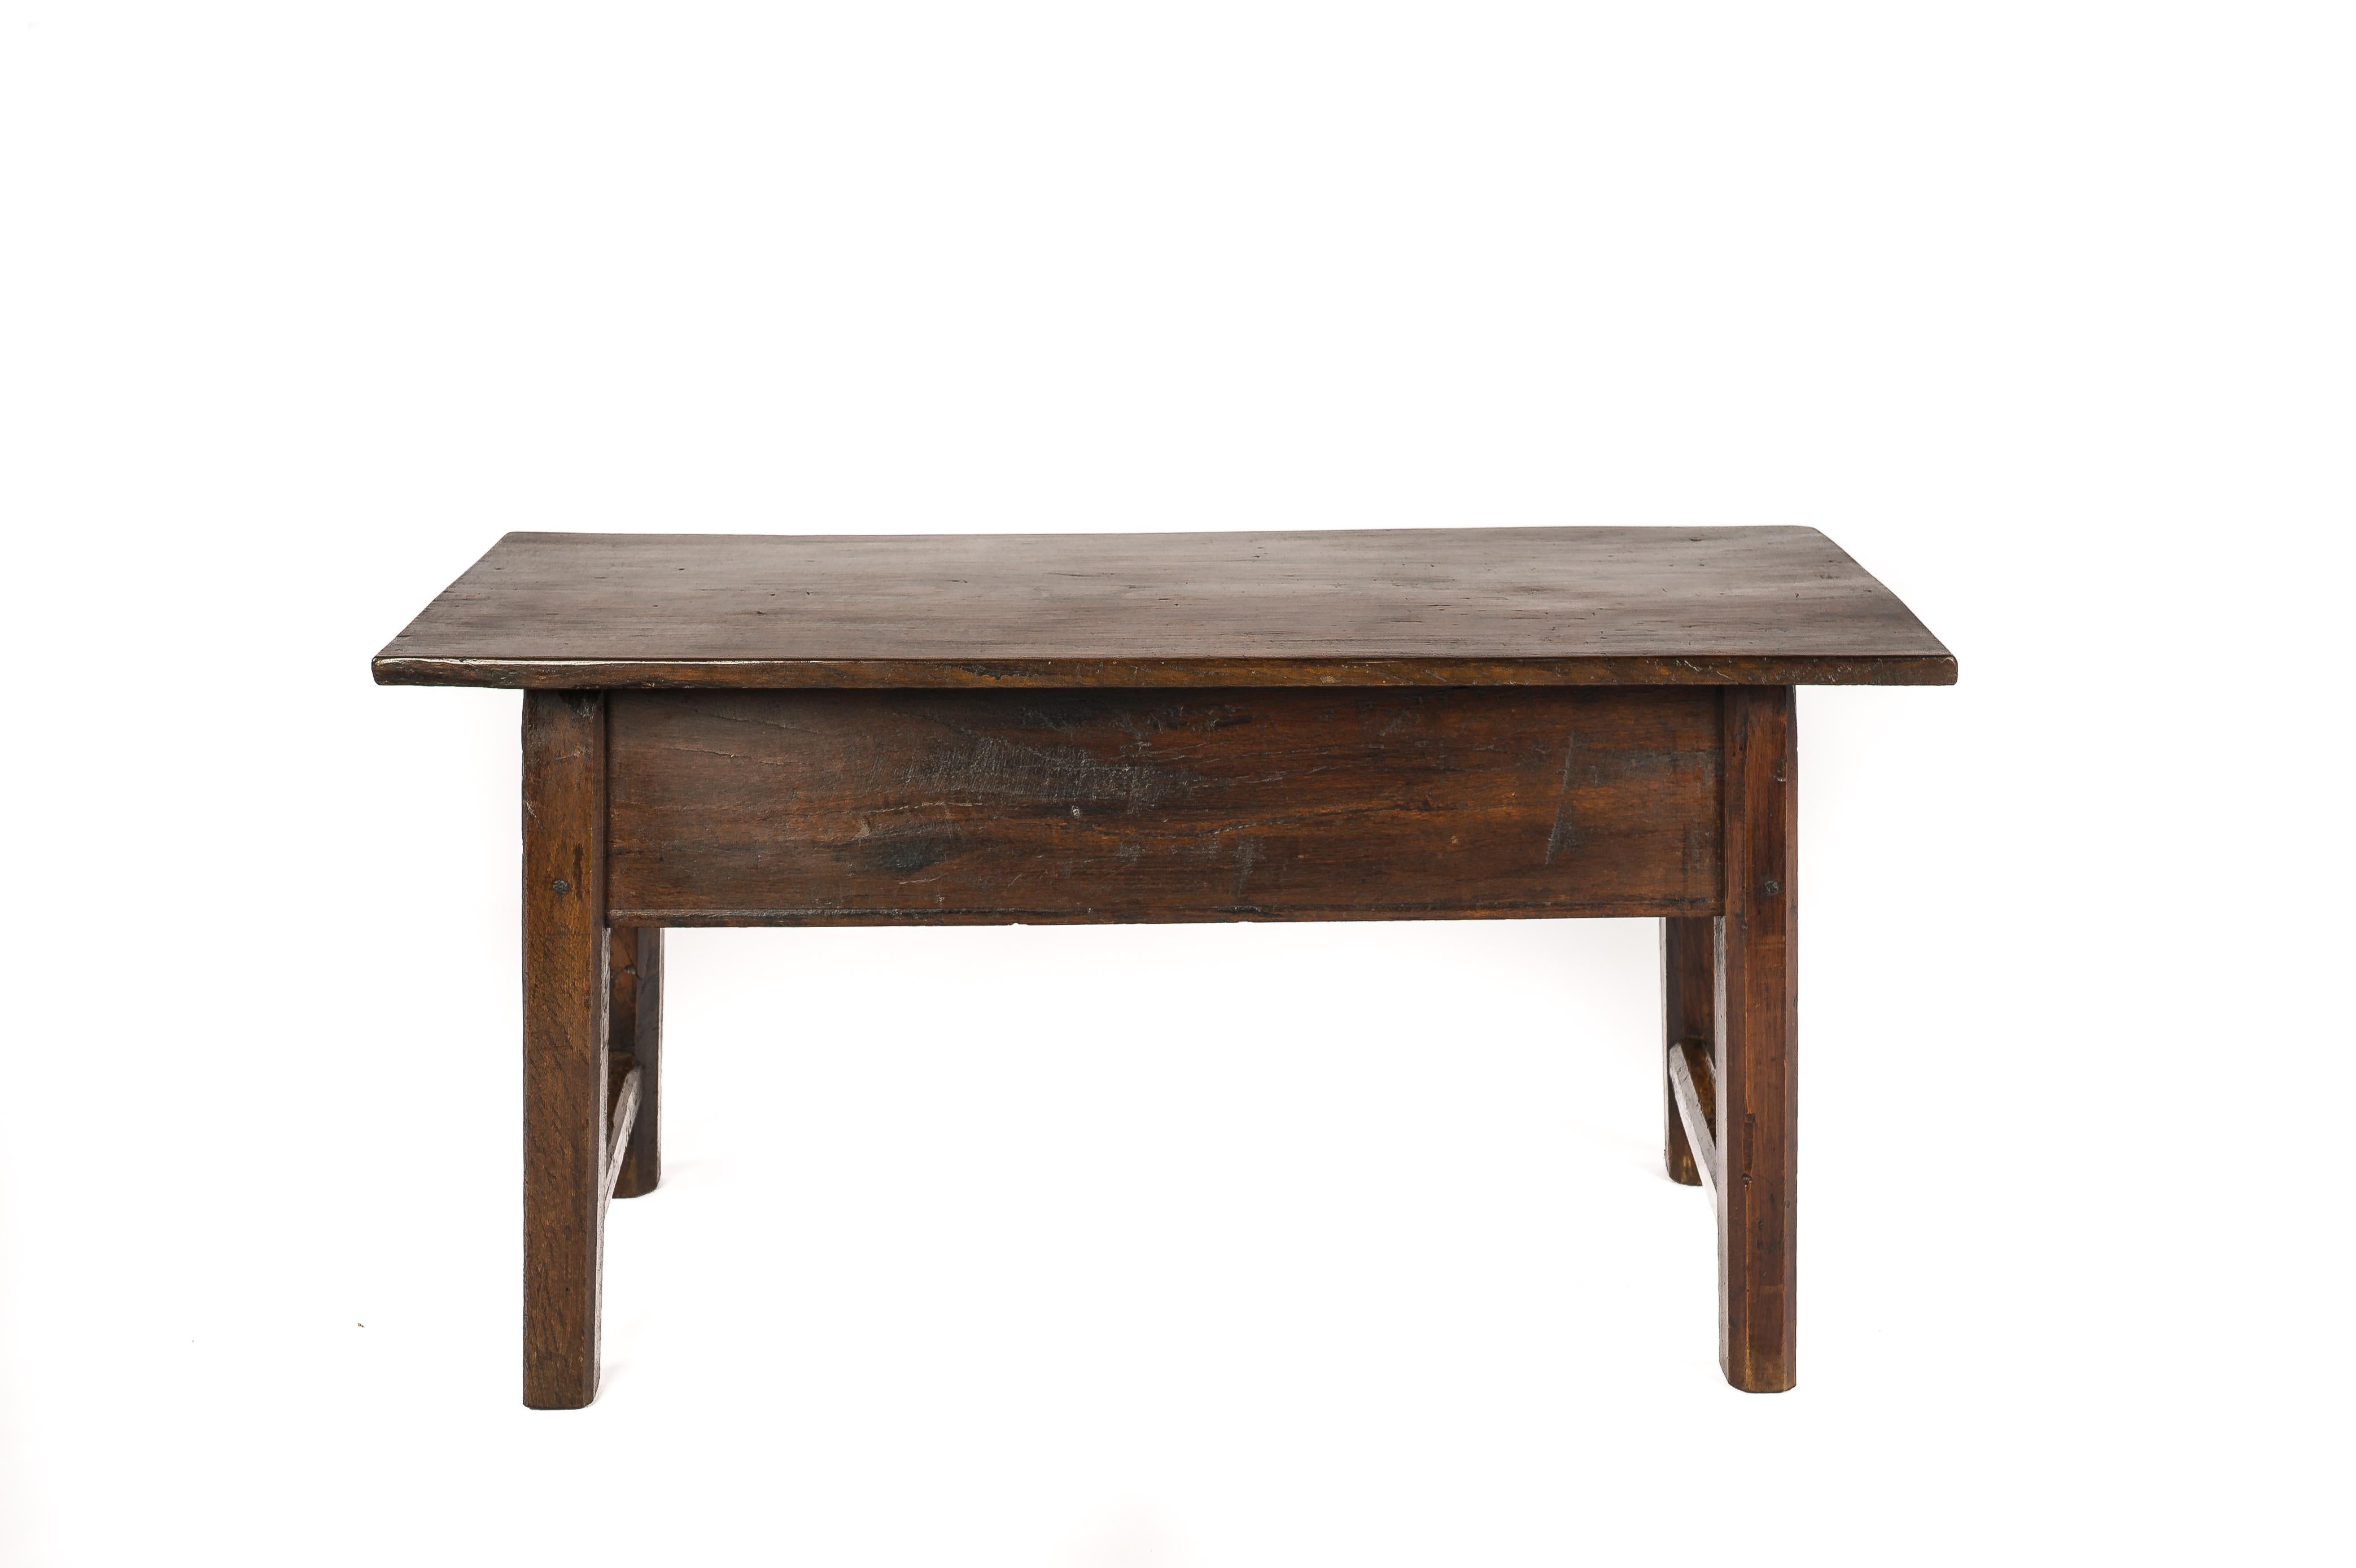 Antique Rural Early 19th Century Warm Brown Spanish Chestnut Coffee Table In Good Condition For Sale In Casteren, NL